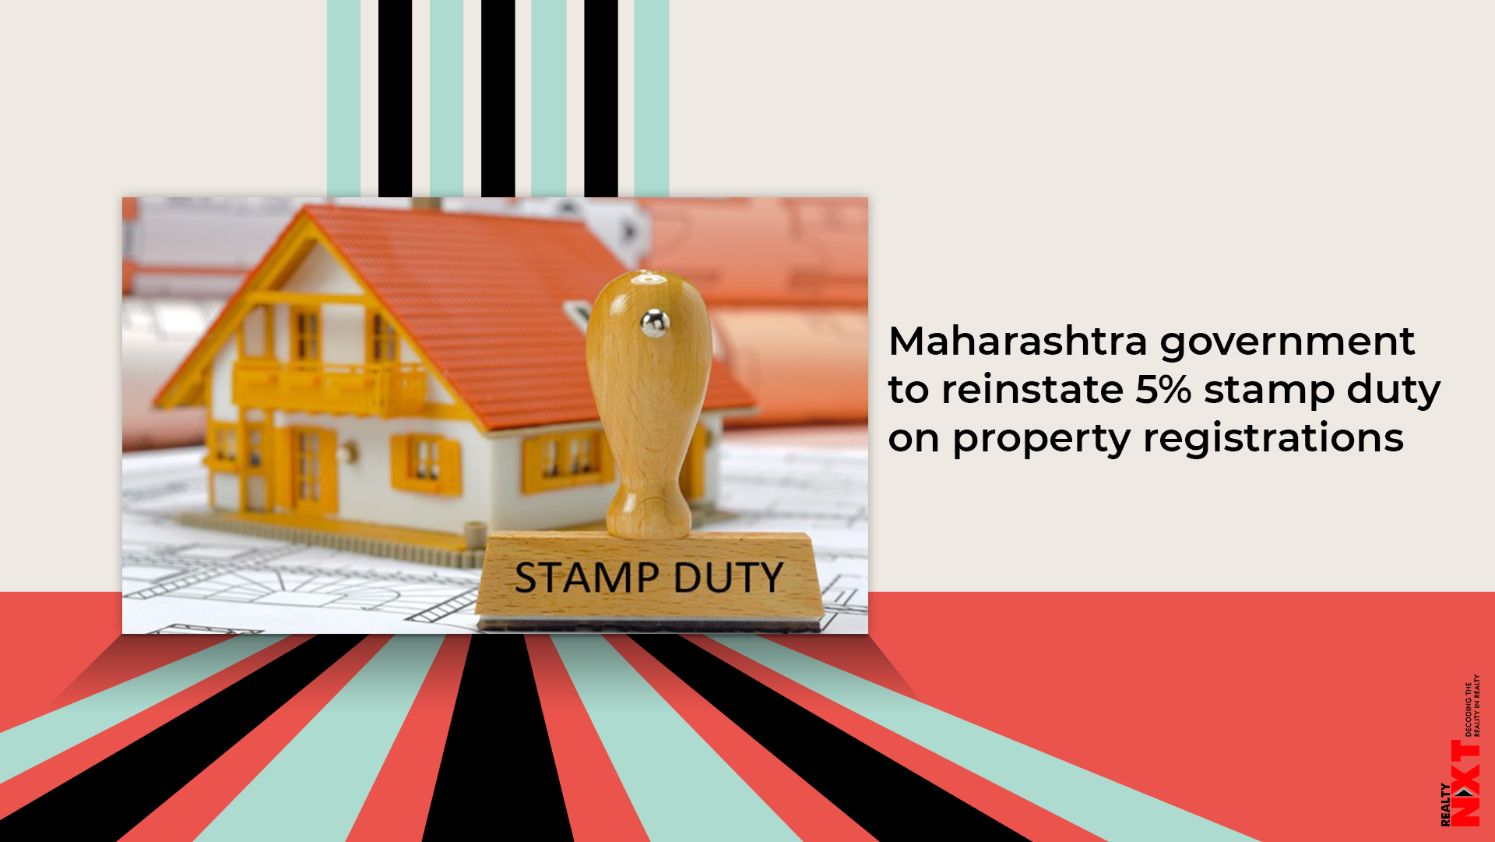 Govt To Reinstate 5% Stamp Duty On Property Registrations Maha